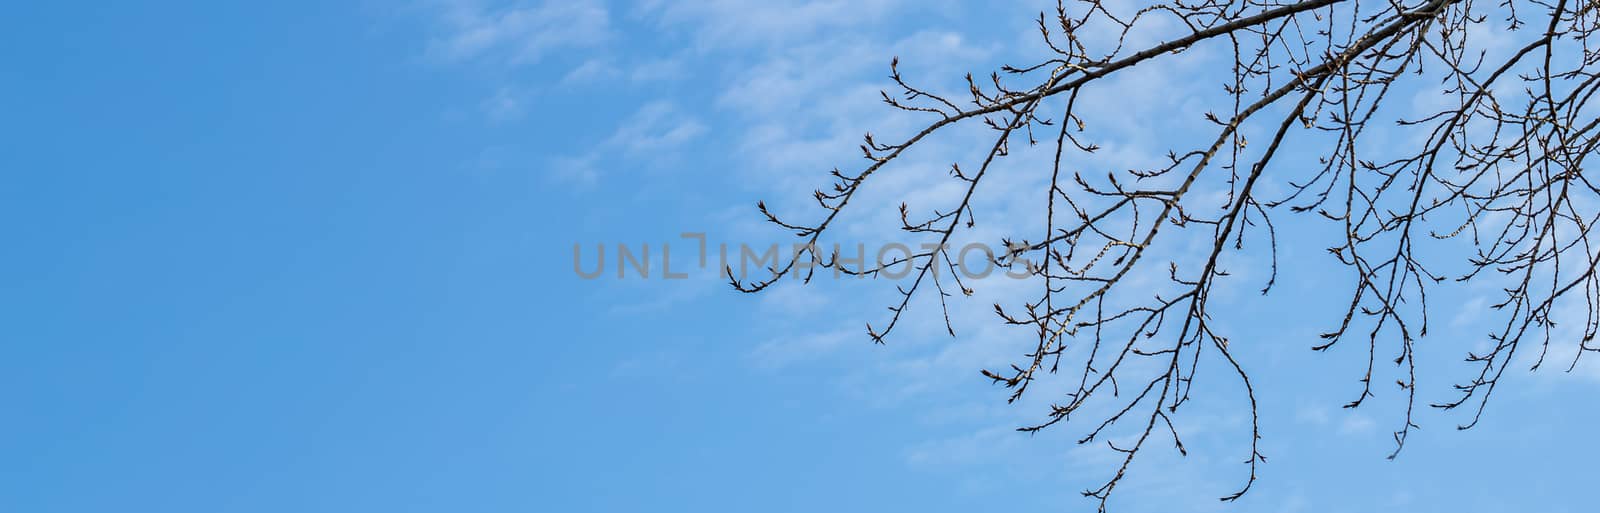 leafless tree branches against the blue sky by bonilook